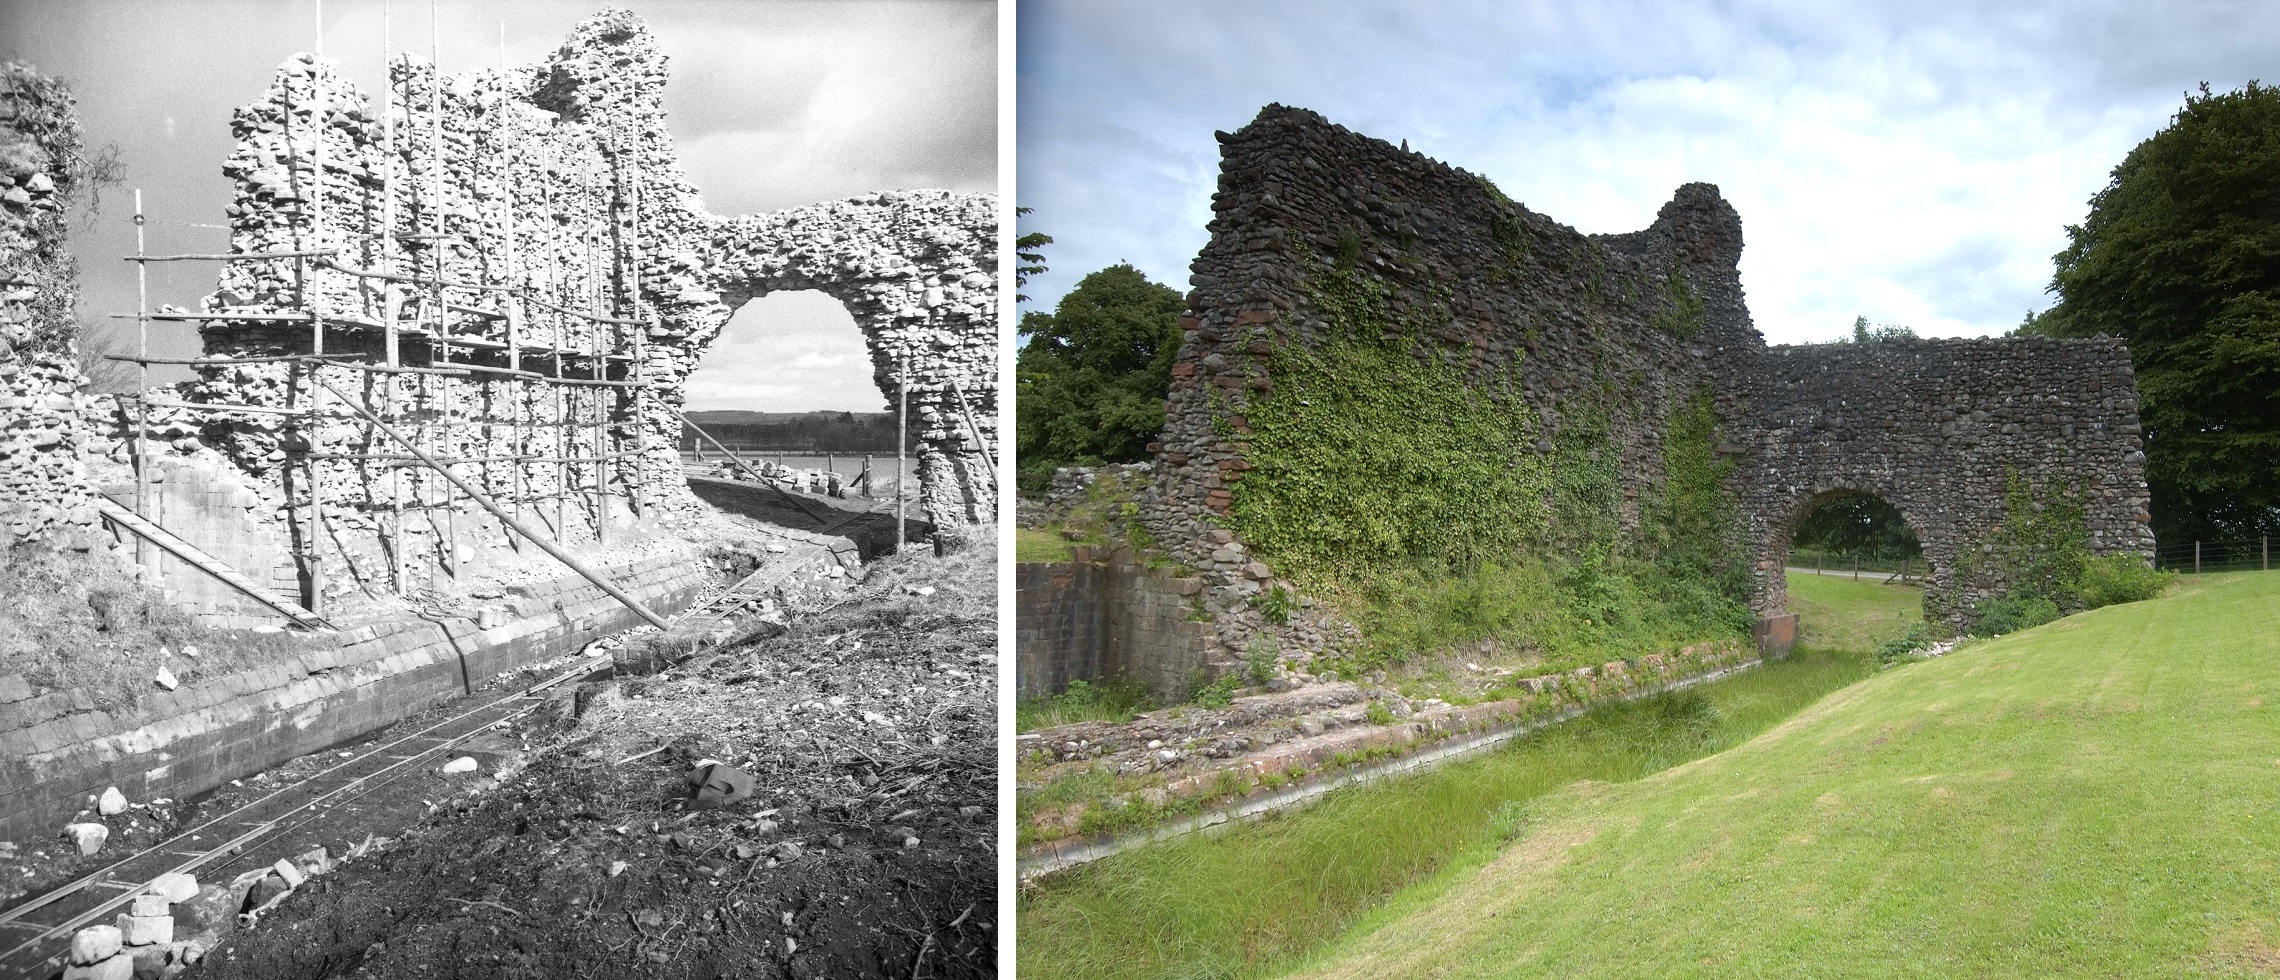 Lochmaben Castle in 1952 and now